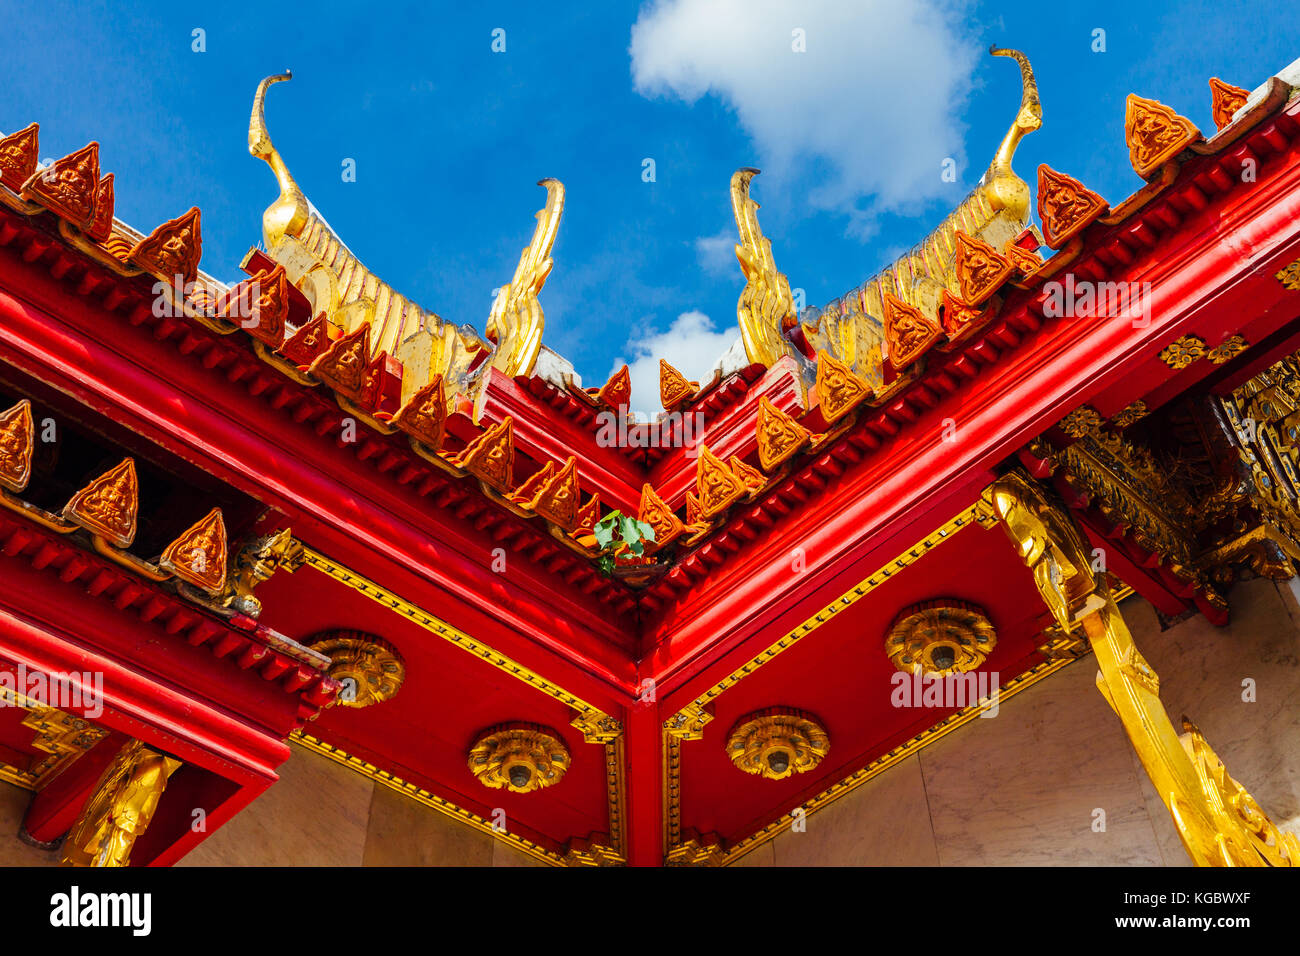 Bangkok, Thailand - September 10, 2016: Architectural details of Wat Benchamabophit also known as Marble Temple on Septemper 10, 2016 in Bangkok, Thai Stock Photo